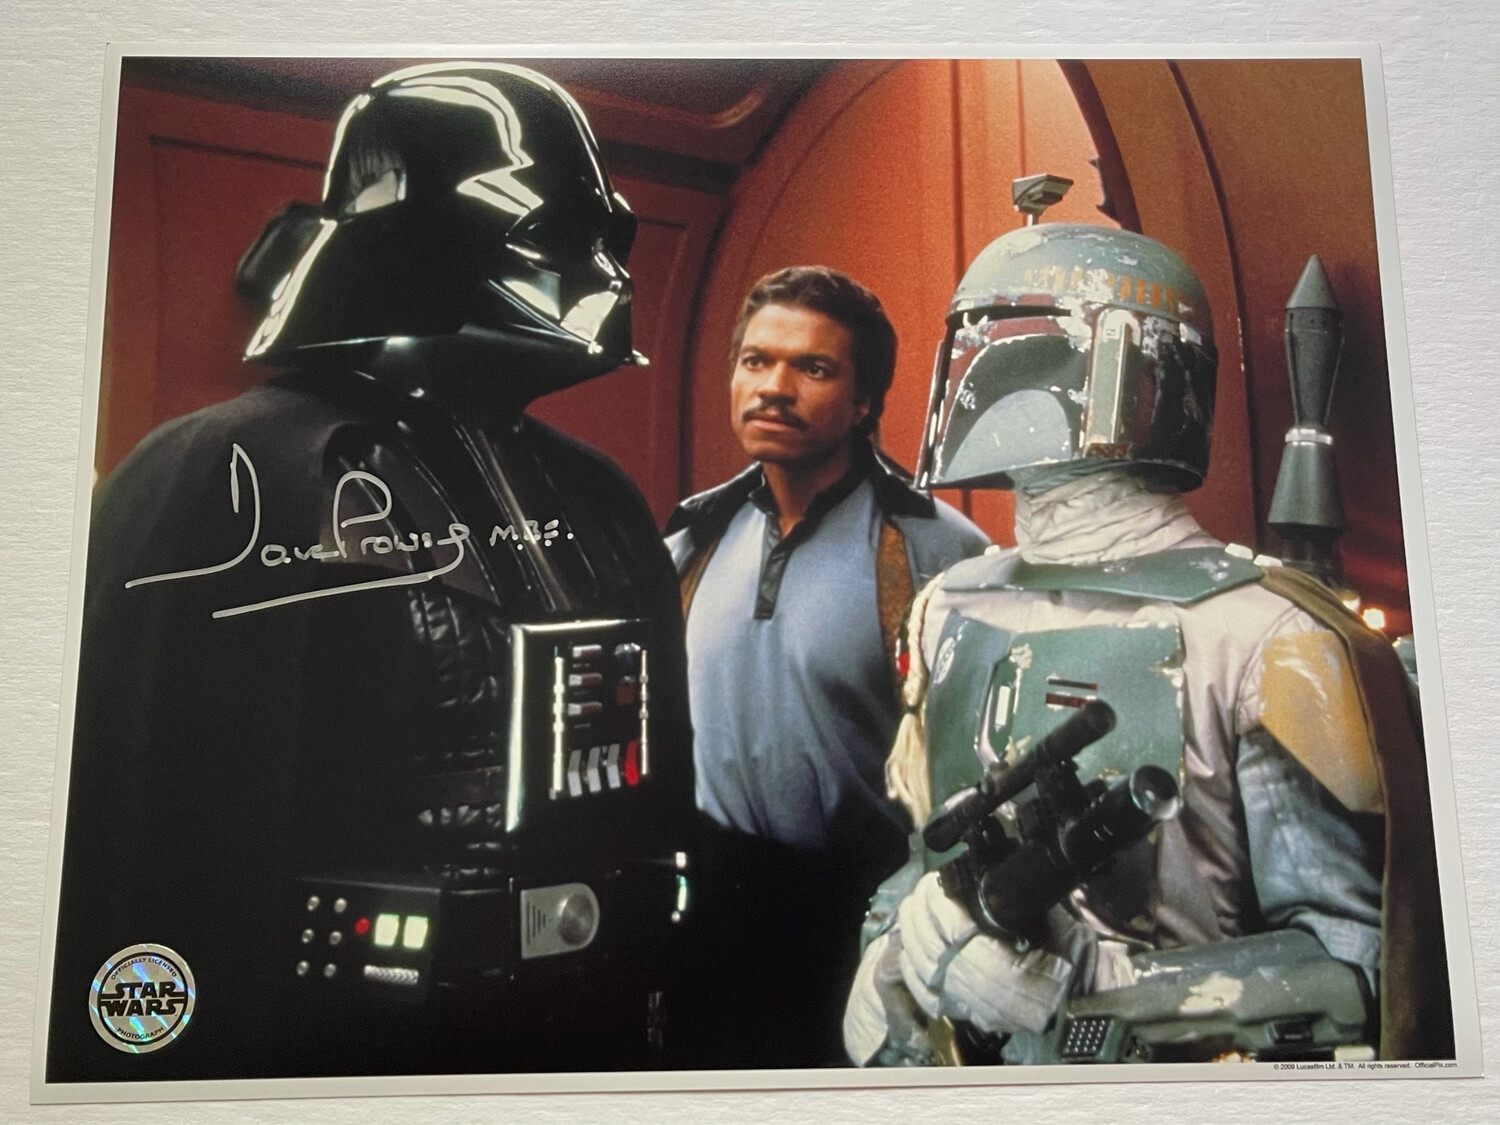 11X14 DARTH VADER PHOTO SIGNED BY DAVE PROWSE